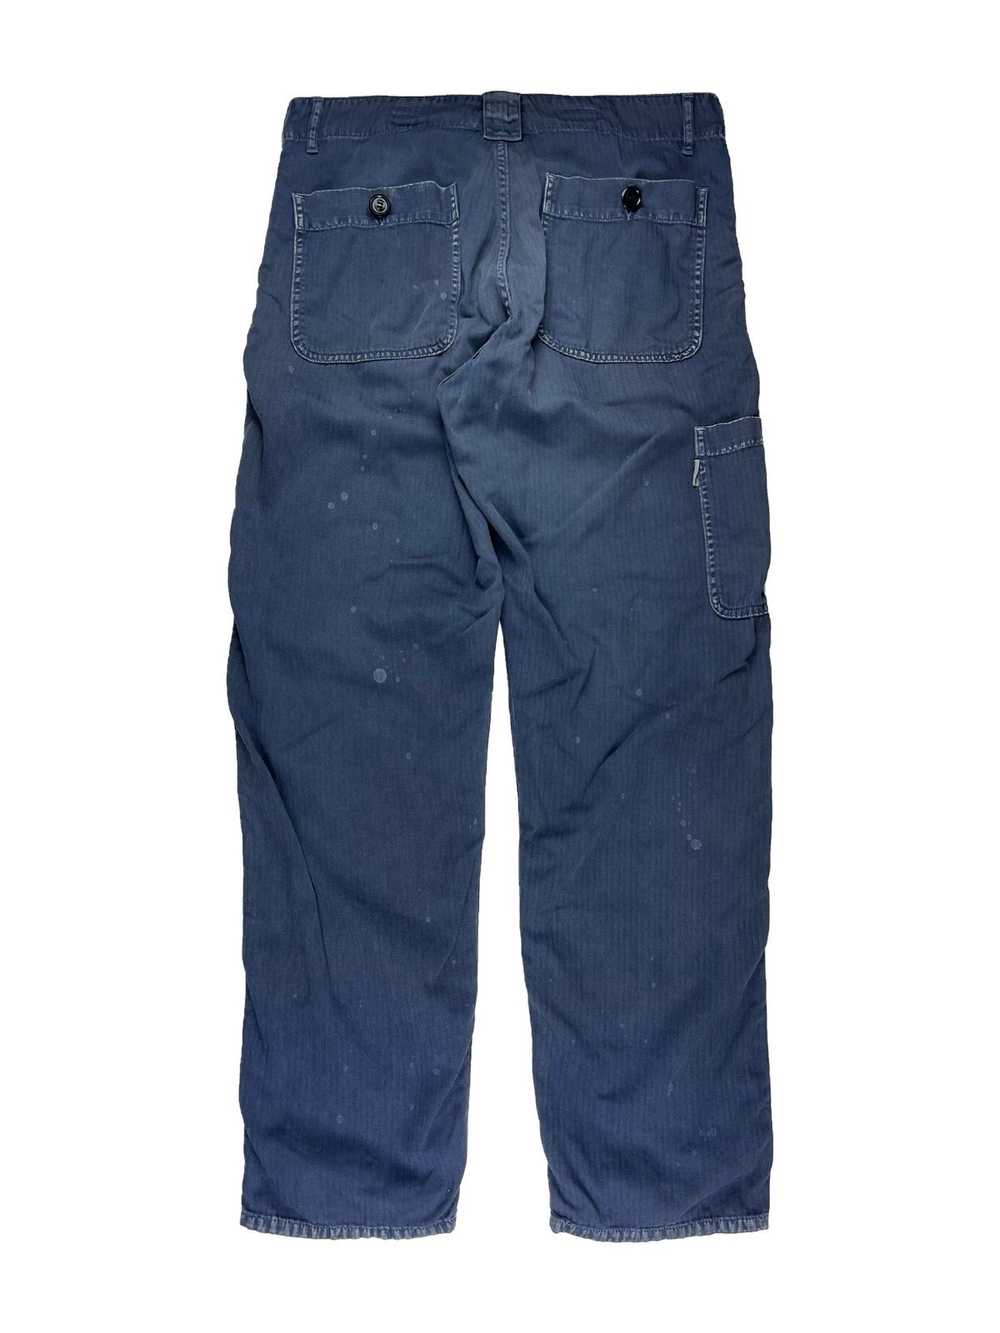 Undercover SS11 Undercover Underman Painter Pants - image 2